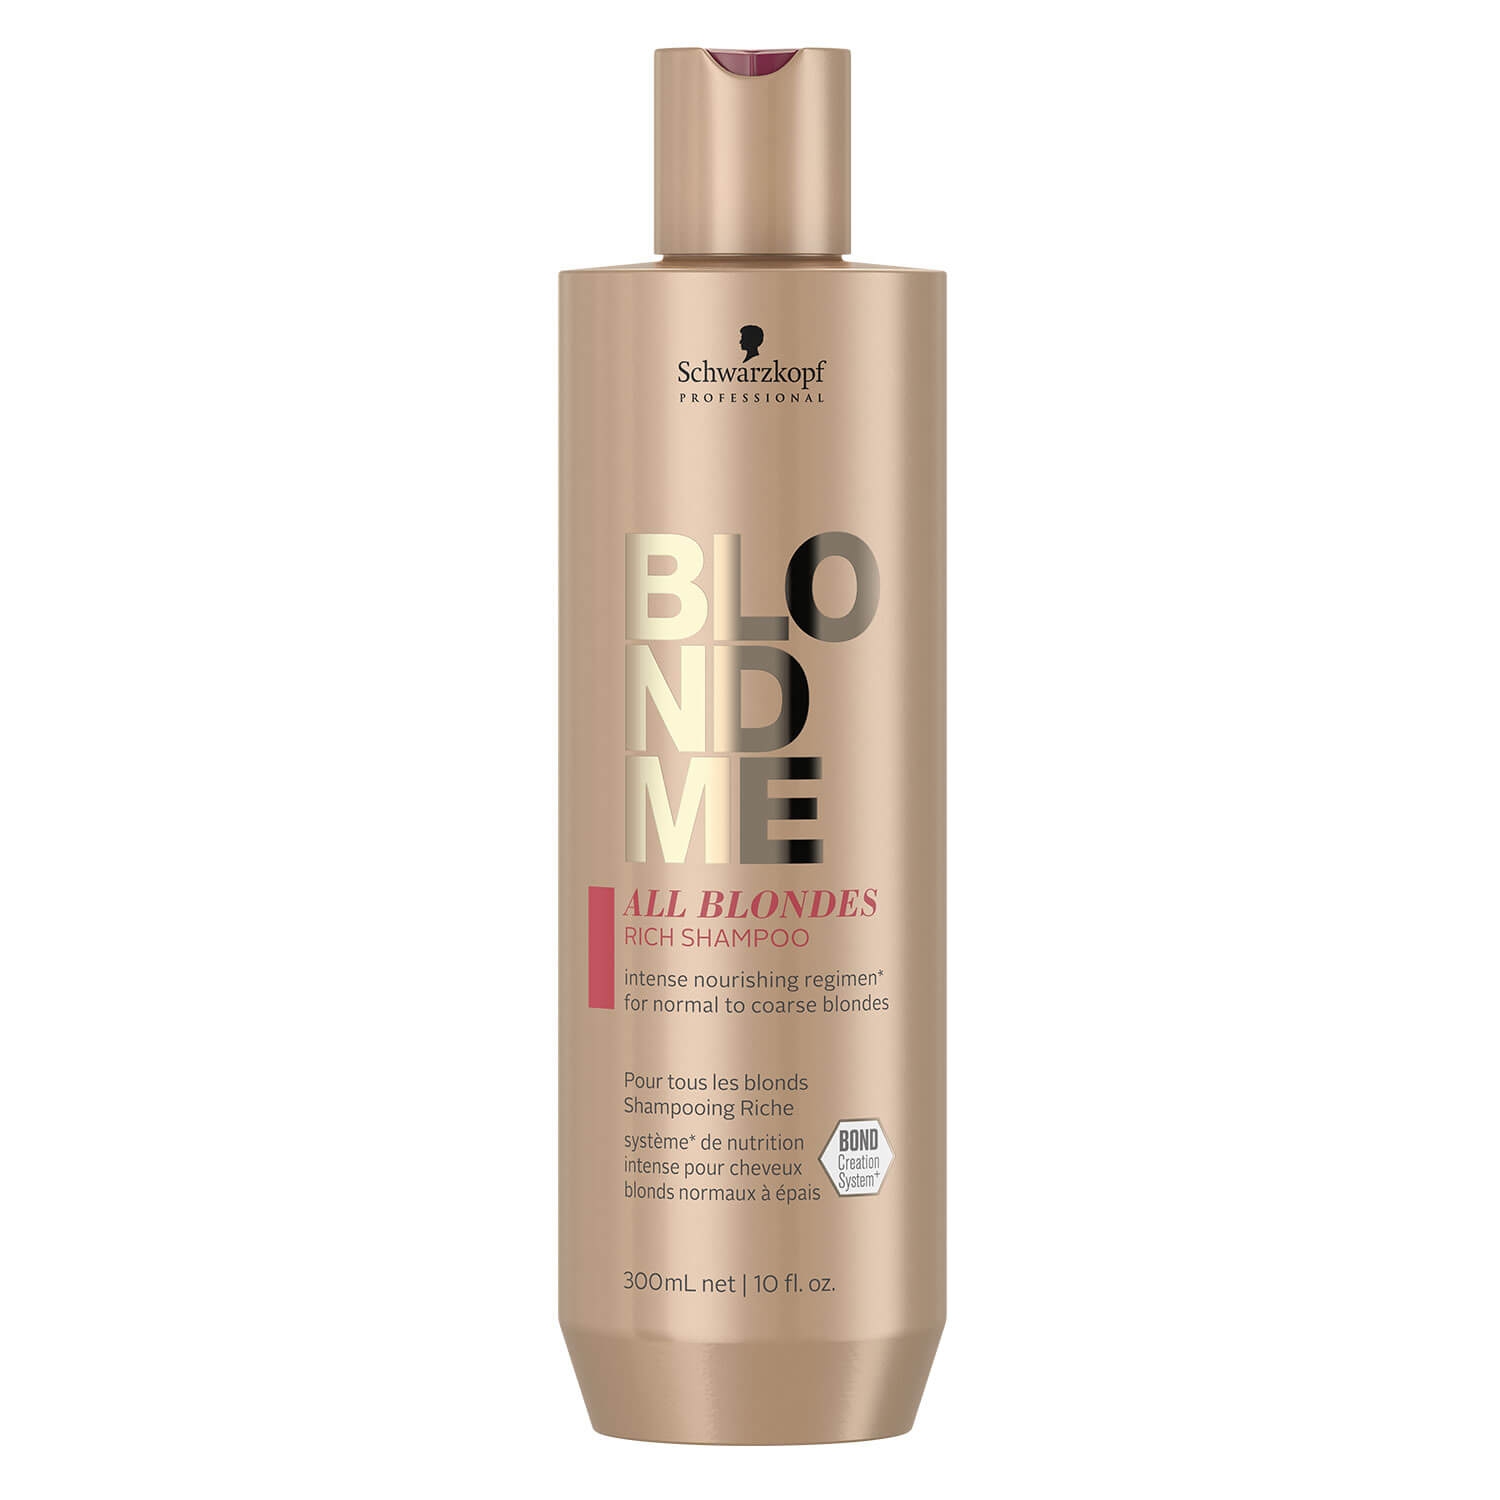 Product image from Blondme - All Blondes Rich Shampoo